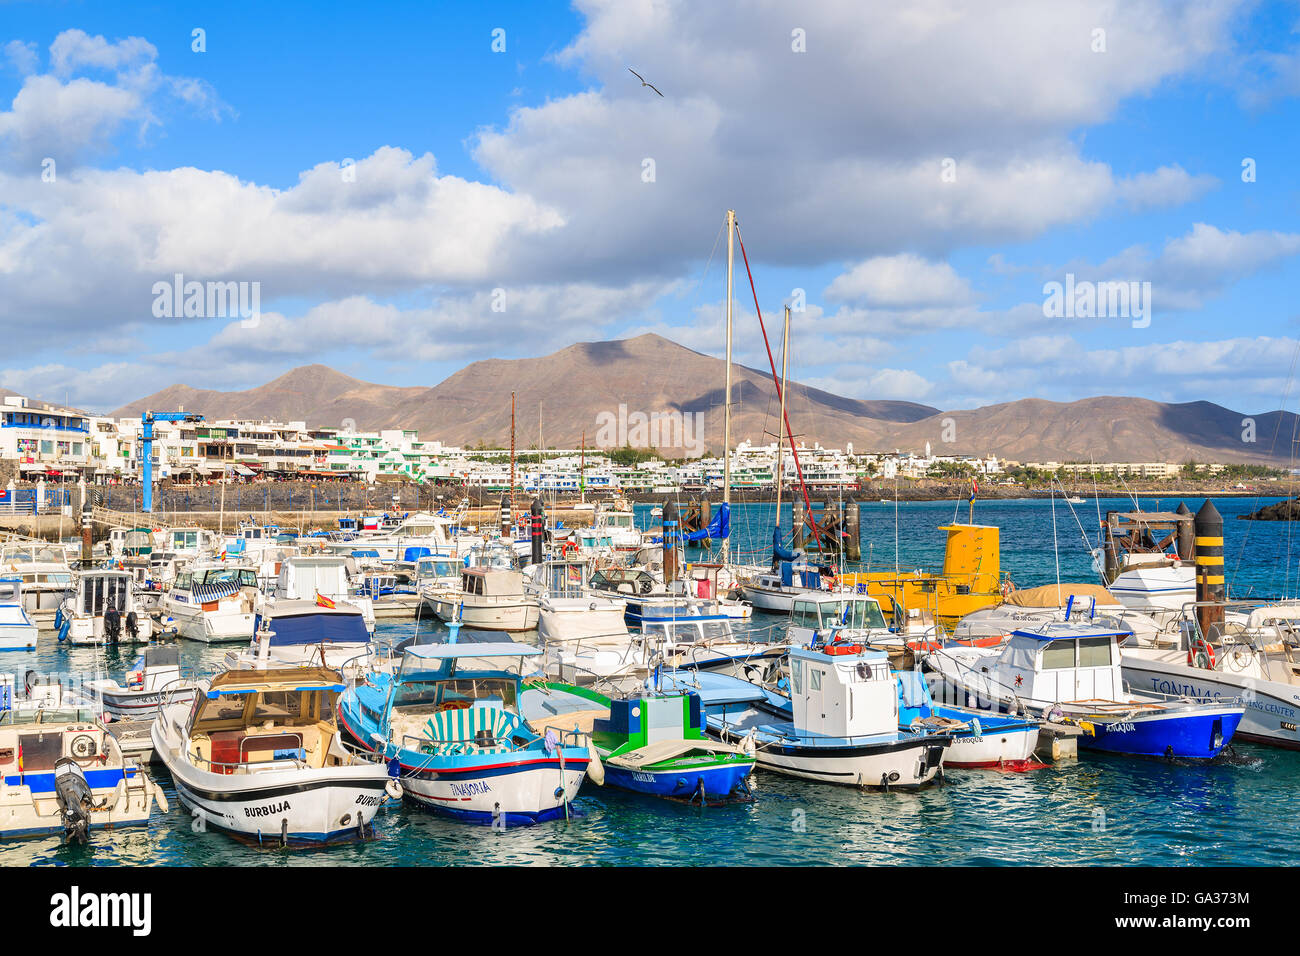 PLAYA BLANCA PORT, LANZAROTE ISLAND - JAN 17, 2015: colourful fishing boats in Playa Blanca harbour on sunny day. Lanzarote is very popular tourist destination among Canary Islands archipelago. Stock Photo